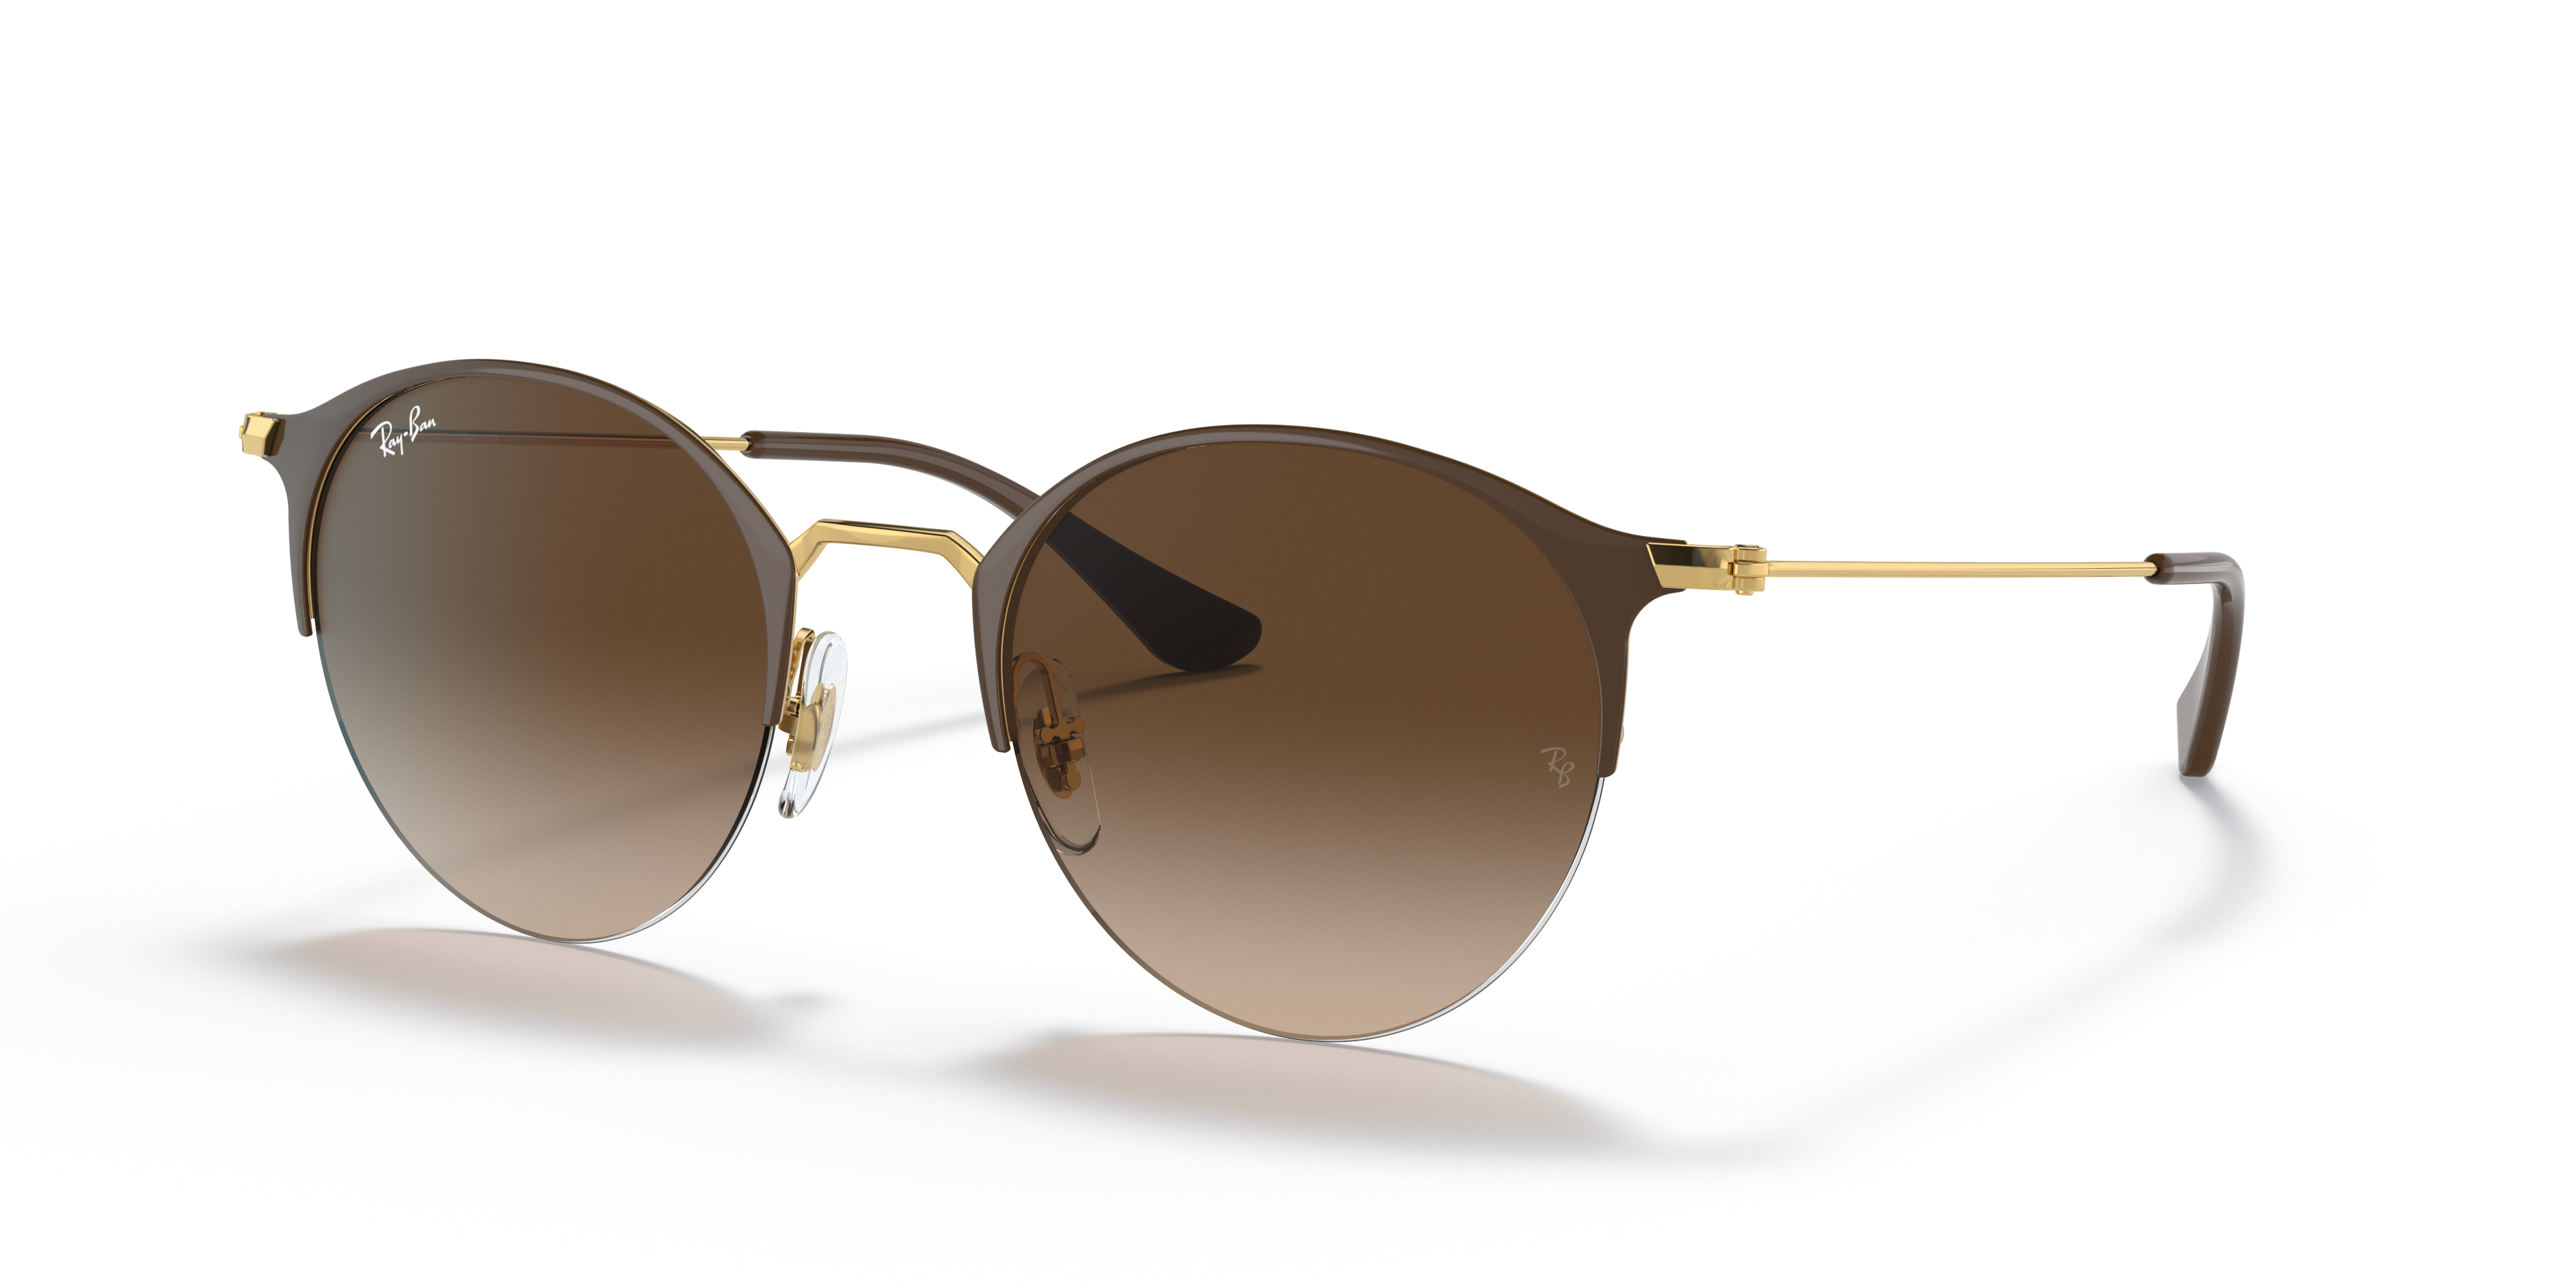 RB3578 Sunglasses in Brown and Brown - RB3578 | Ray-Ban® US